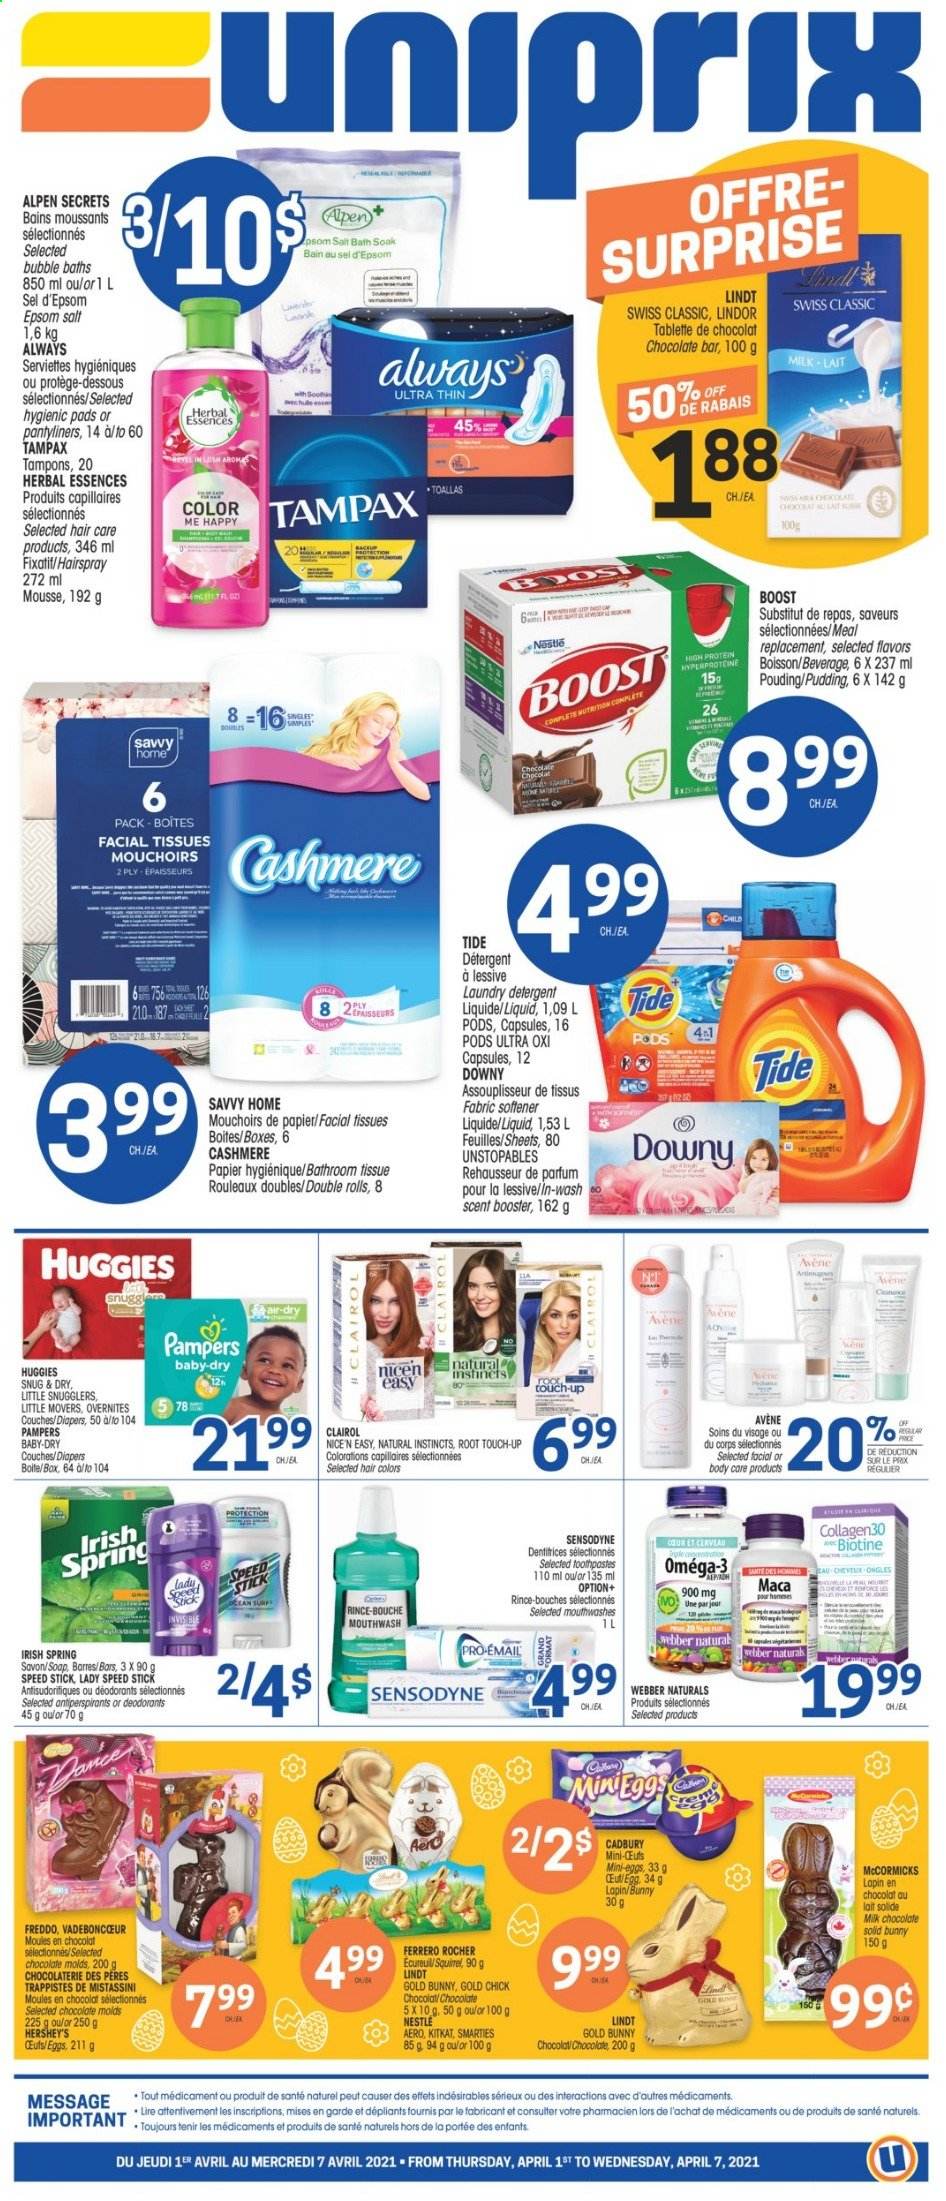 thumbnail - Uniprix Flyer - April 01, 2021 - April 07, 2021 - Sales products - milk chocolate, KitKat, Hershey's, Cadbury, chocolate bar, pudding, Boost, nappies, bath tissue, Tide, Unstopables, fabric softener, laundry detergent, bath salt, soap, mouthwash, pantyliners, tampons, facial tissues, Root Touch-Up, Clairol, Herbal Essences, Speed Stick, Omega-3, Nestlé, Tampax, Huggies, Pampers, Sensodyne, deodorant. Page 1.